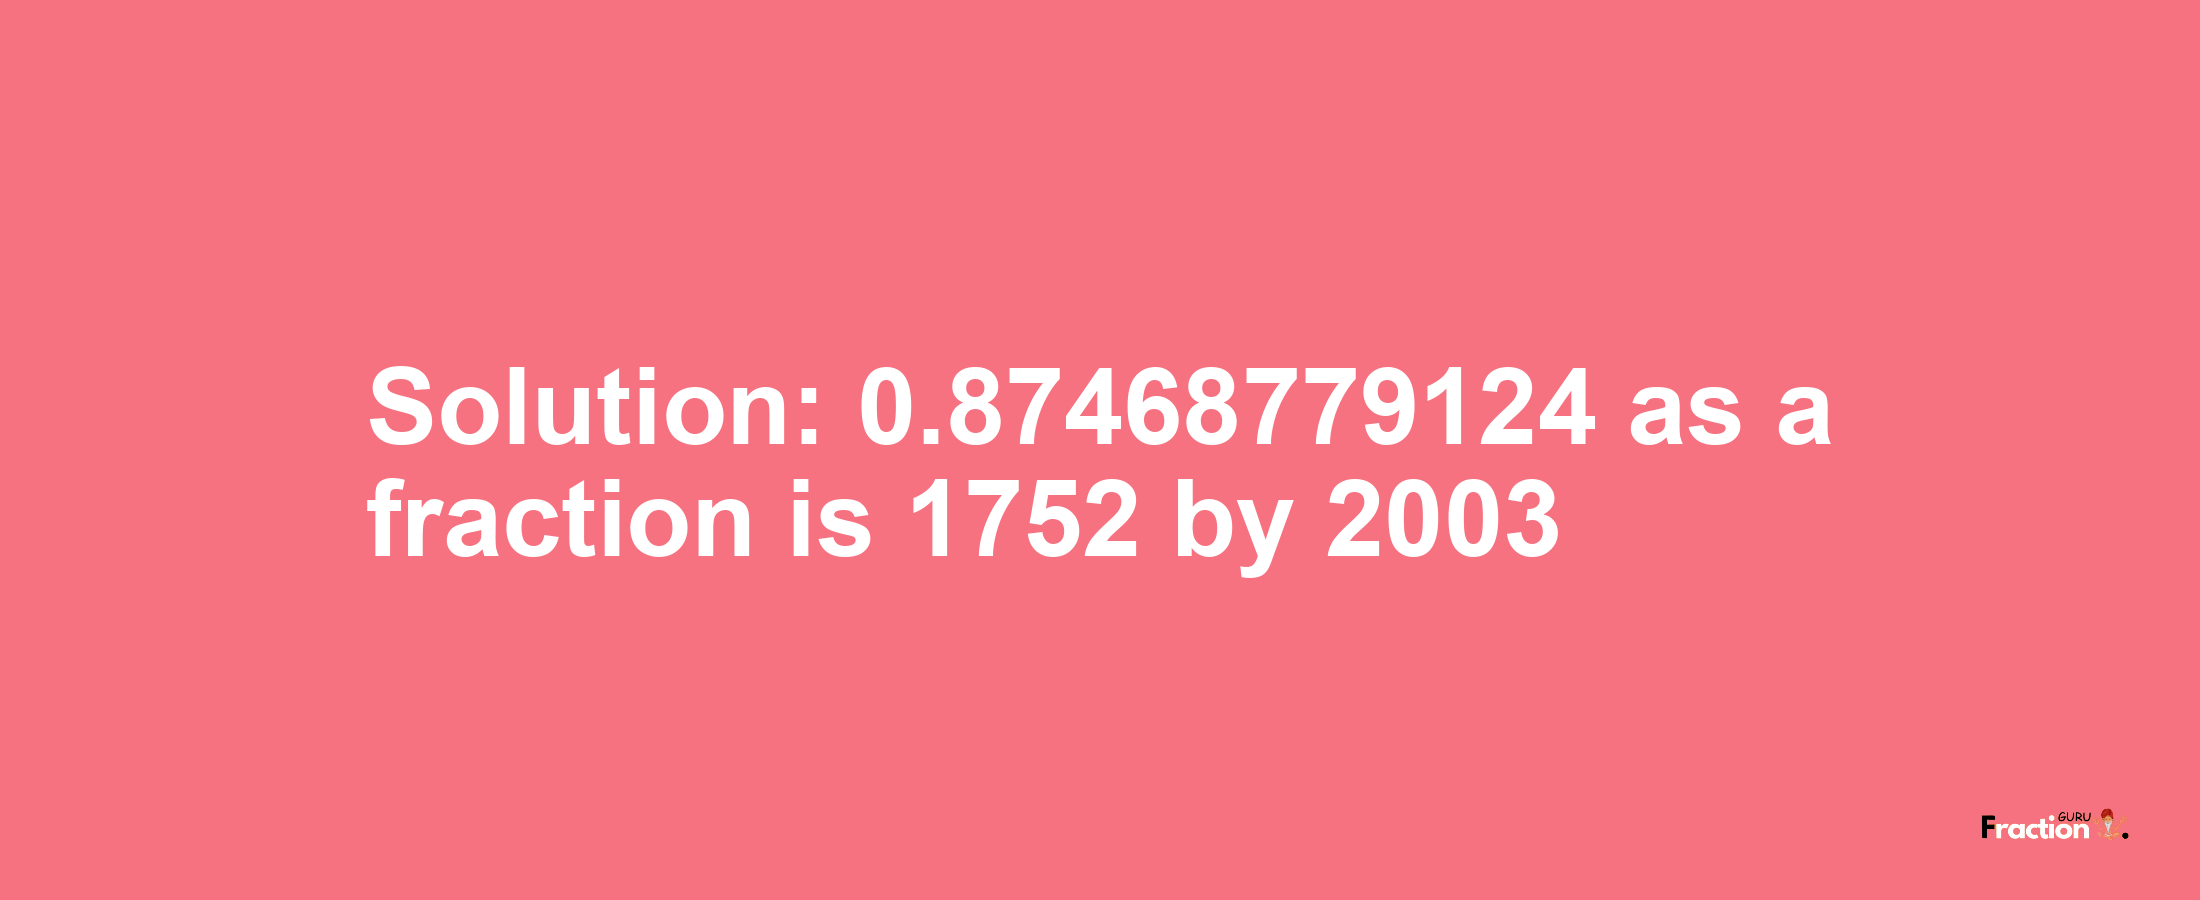 Solution:0.87468779124 as a fraction is 1752/2003